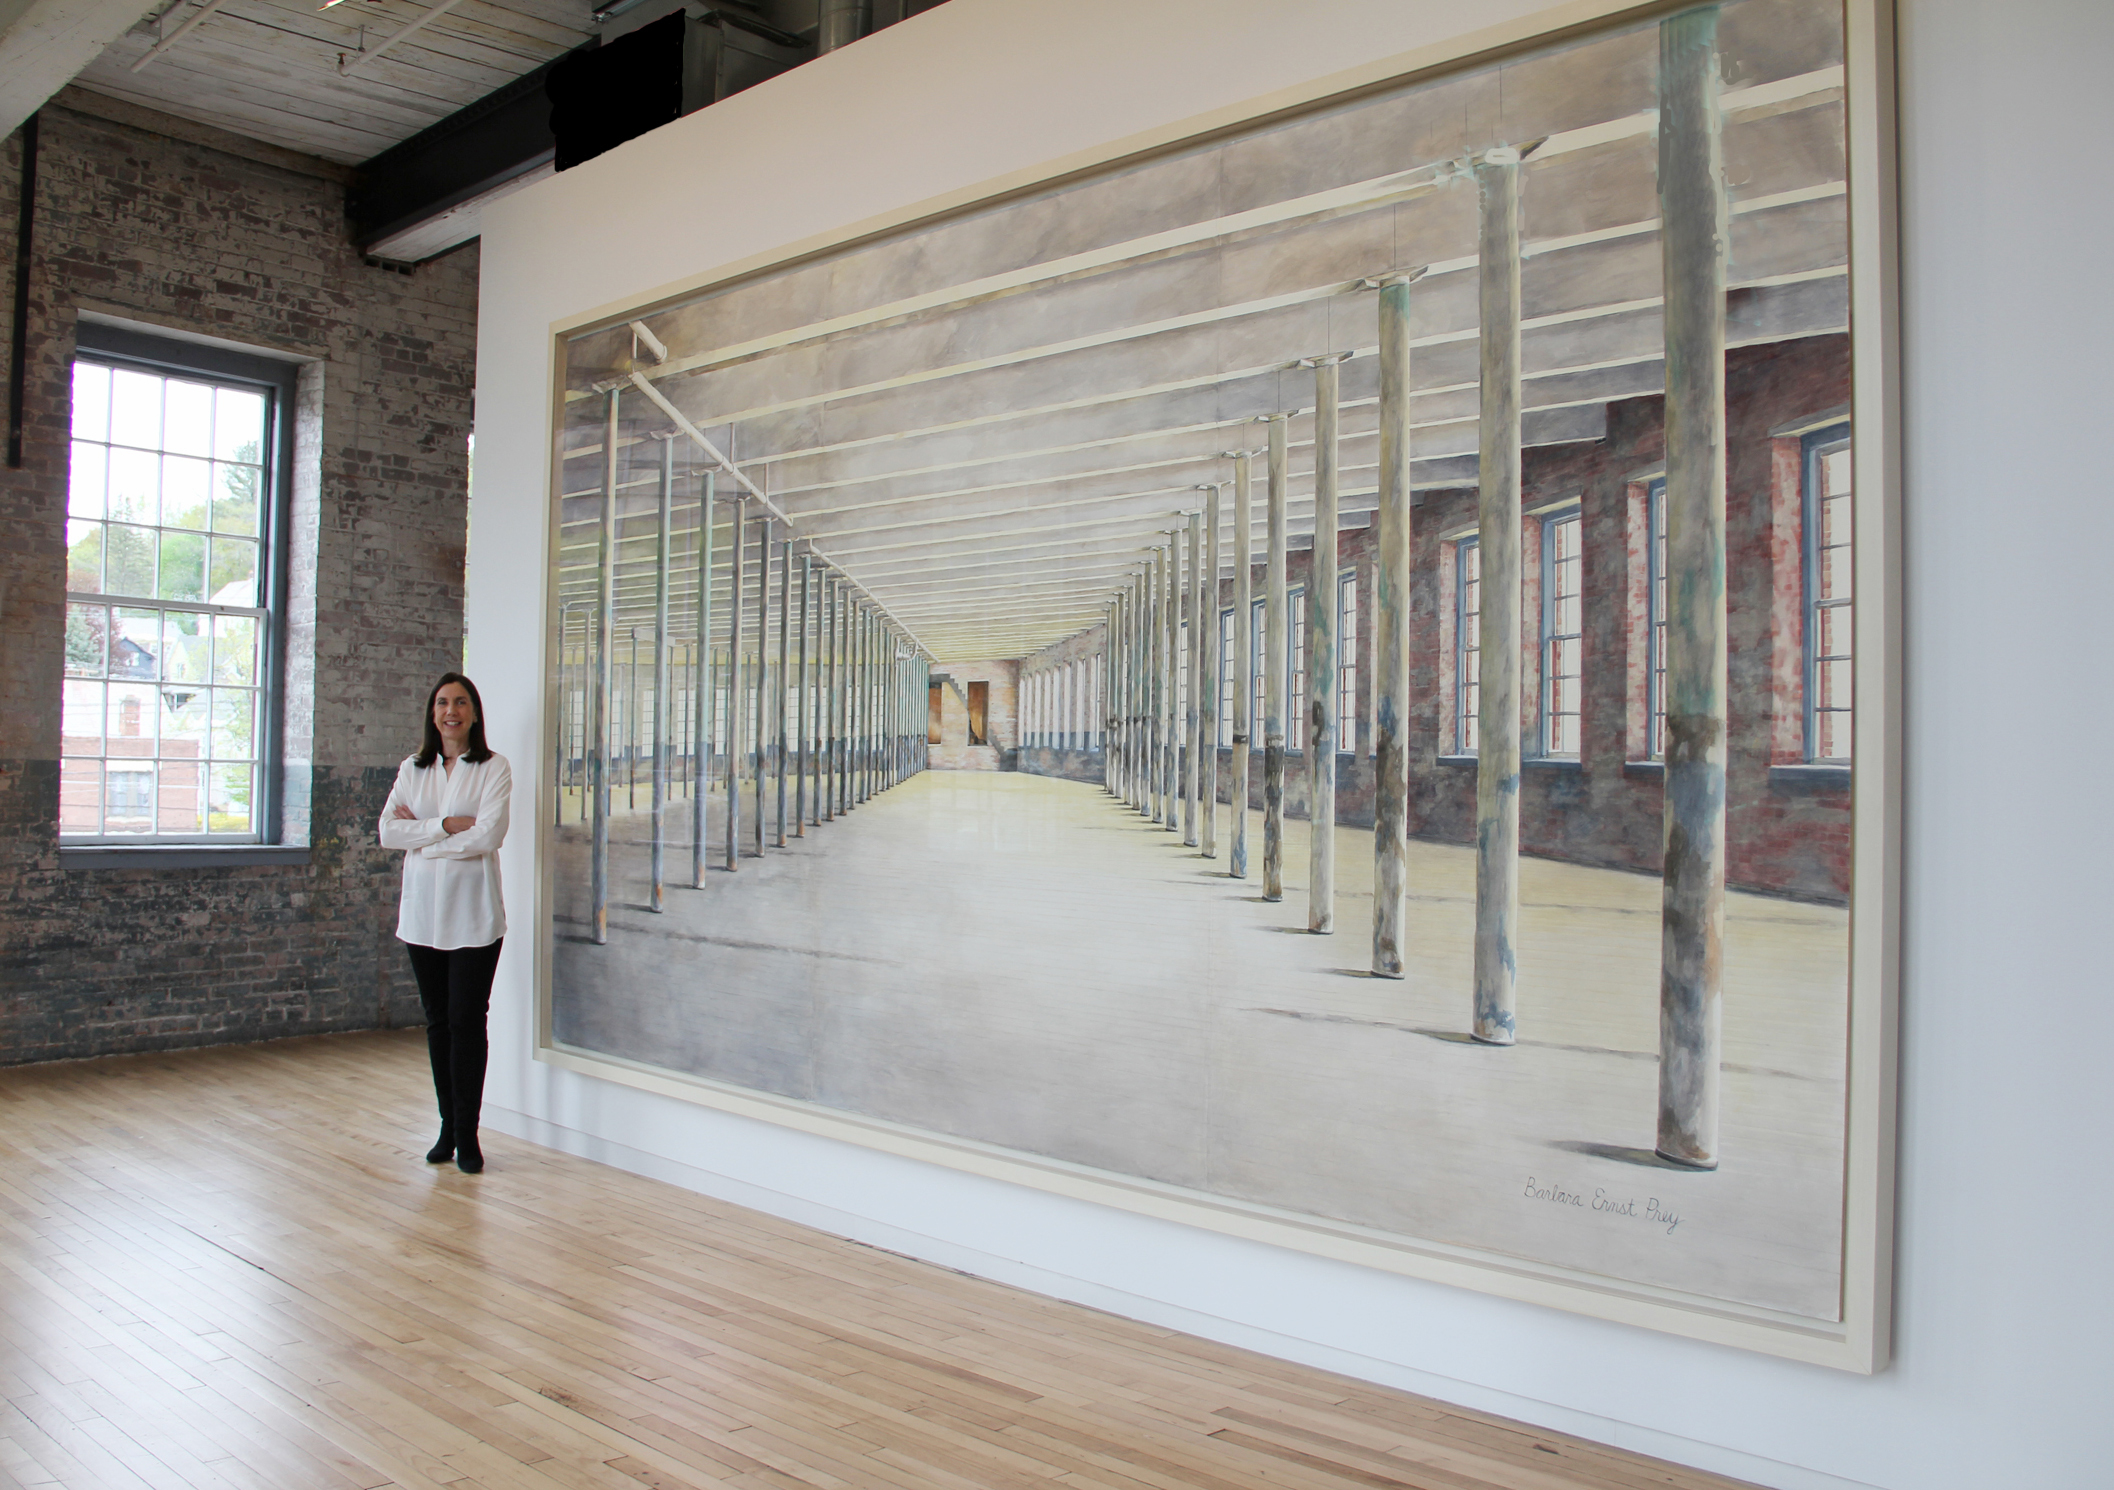 Artist Barbara Prey in front of her finished commission at Mass MoCA, 